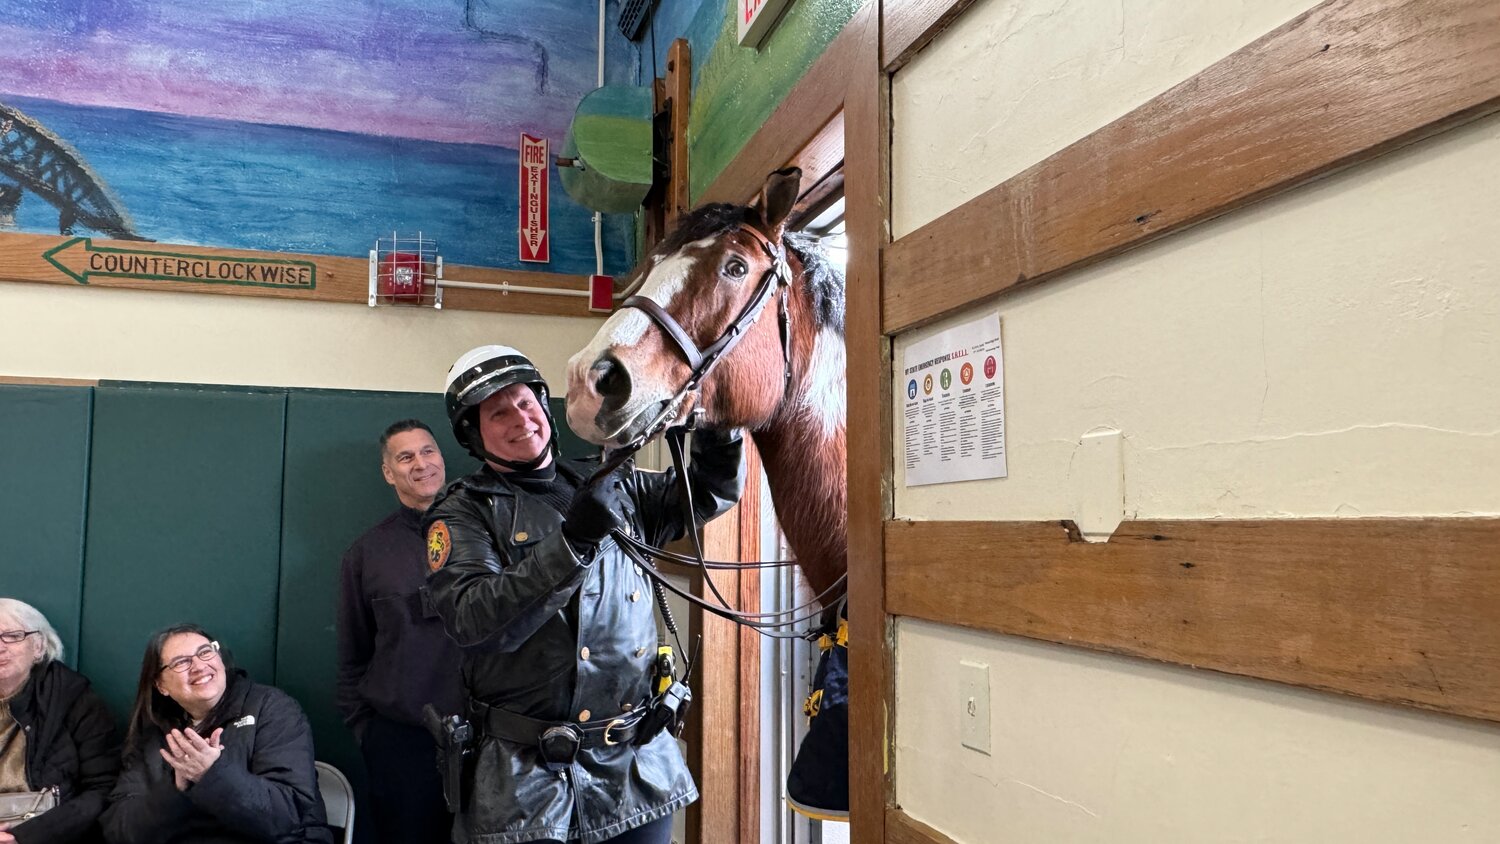 Much to the excitement of everyone in Newbridge’s gymnasium, a horse from the mounted unit popped its head inside to say ‘hello’ to all of the students.